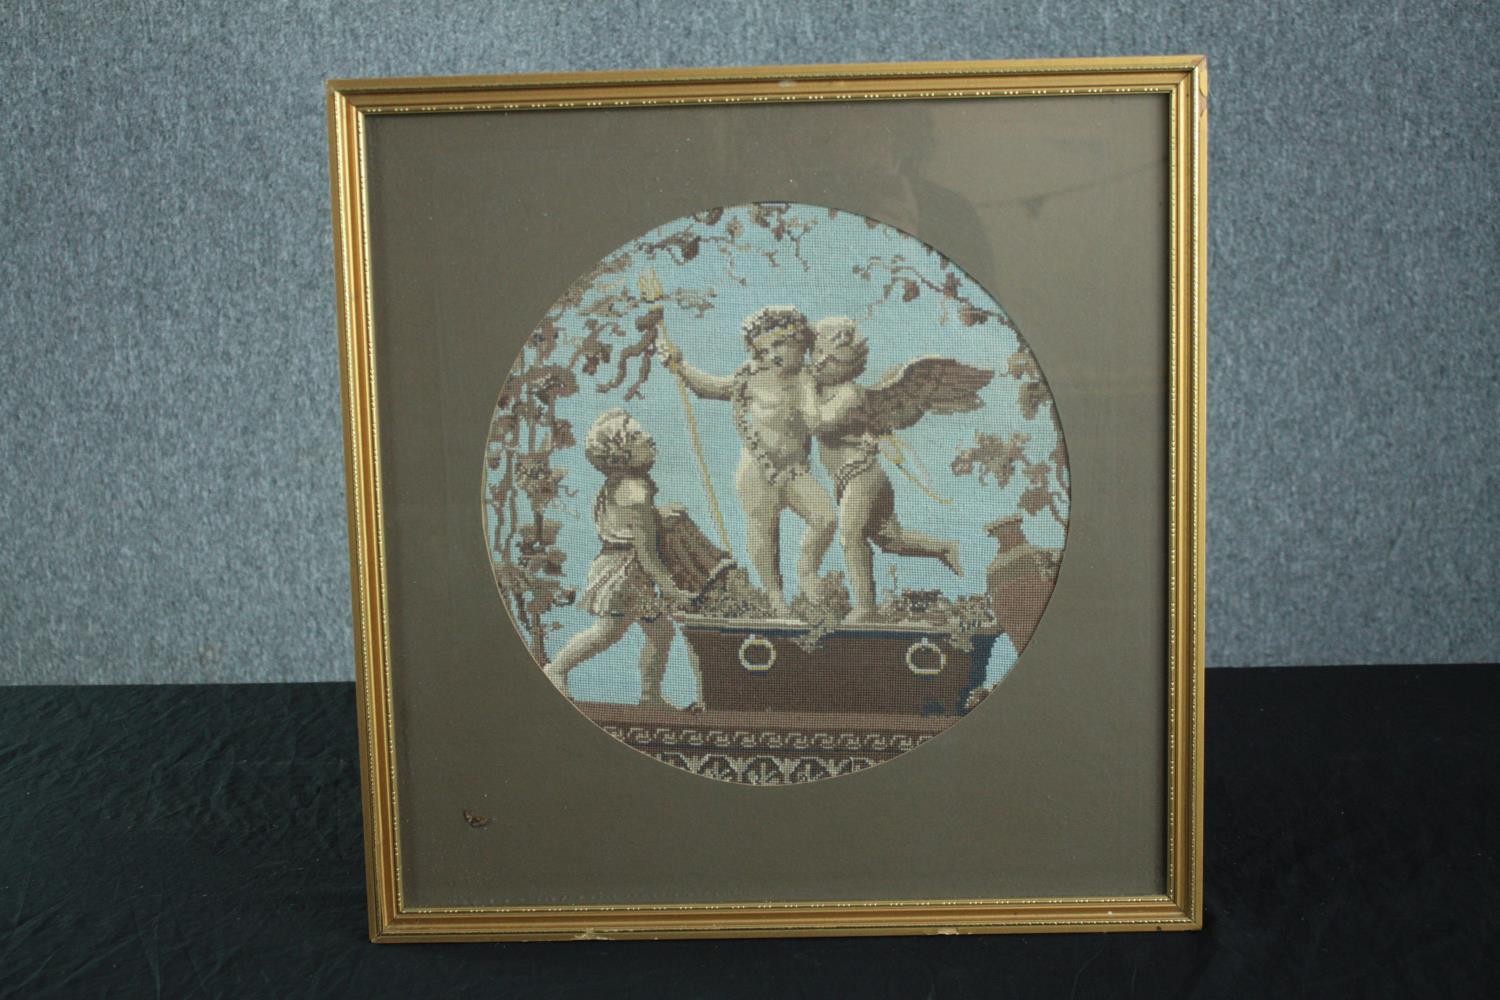 Embroidery. Three classical cherubs. Framed. Nineteenth century. H.50 W.49 cm. - Image 2 of 3